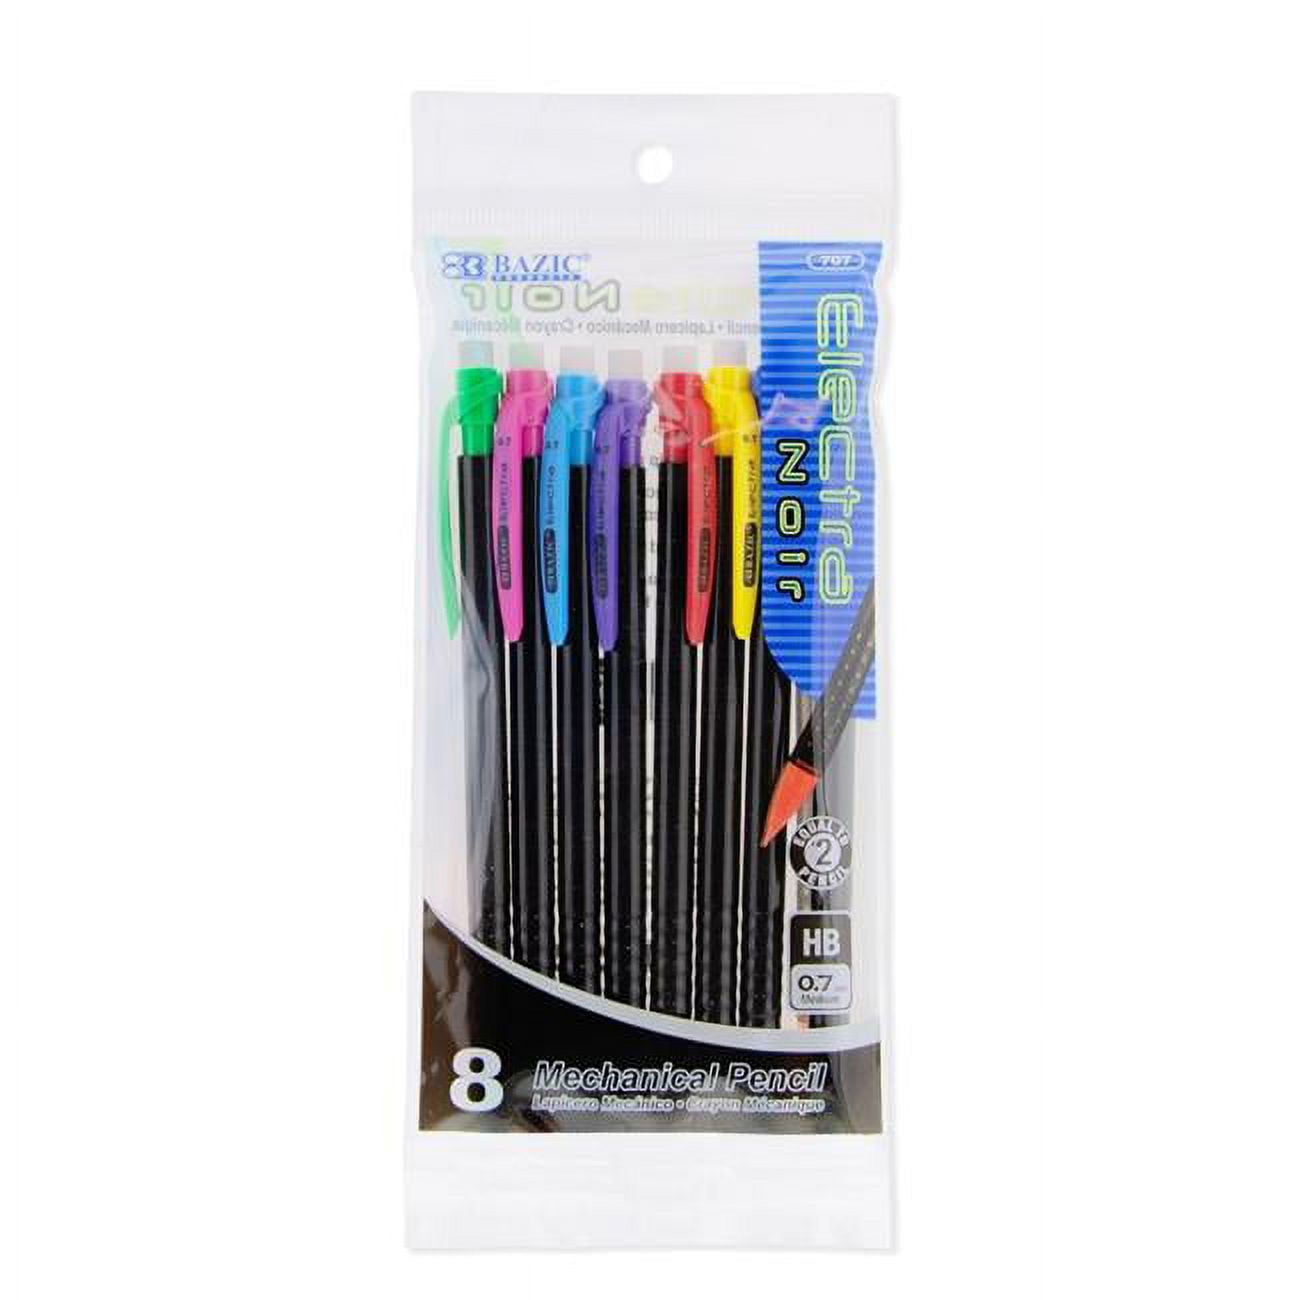 707 Electra Noir 0.7 Mm Mechanical Pencil, Pack Of 8 - Case Of 24